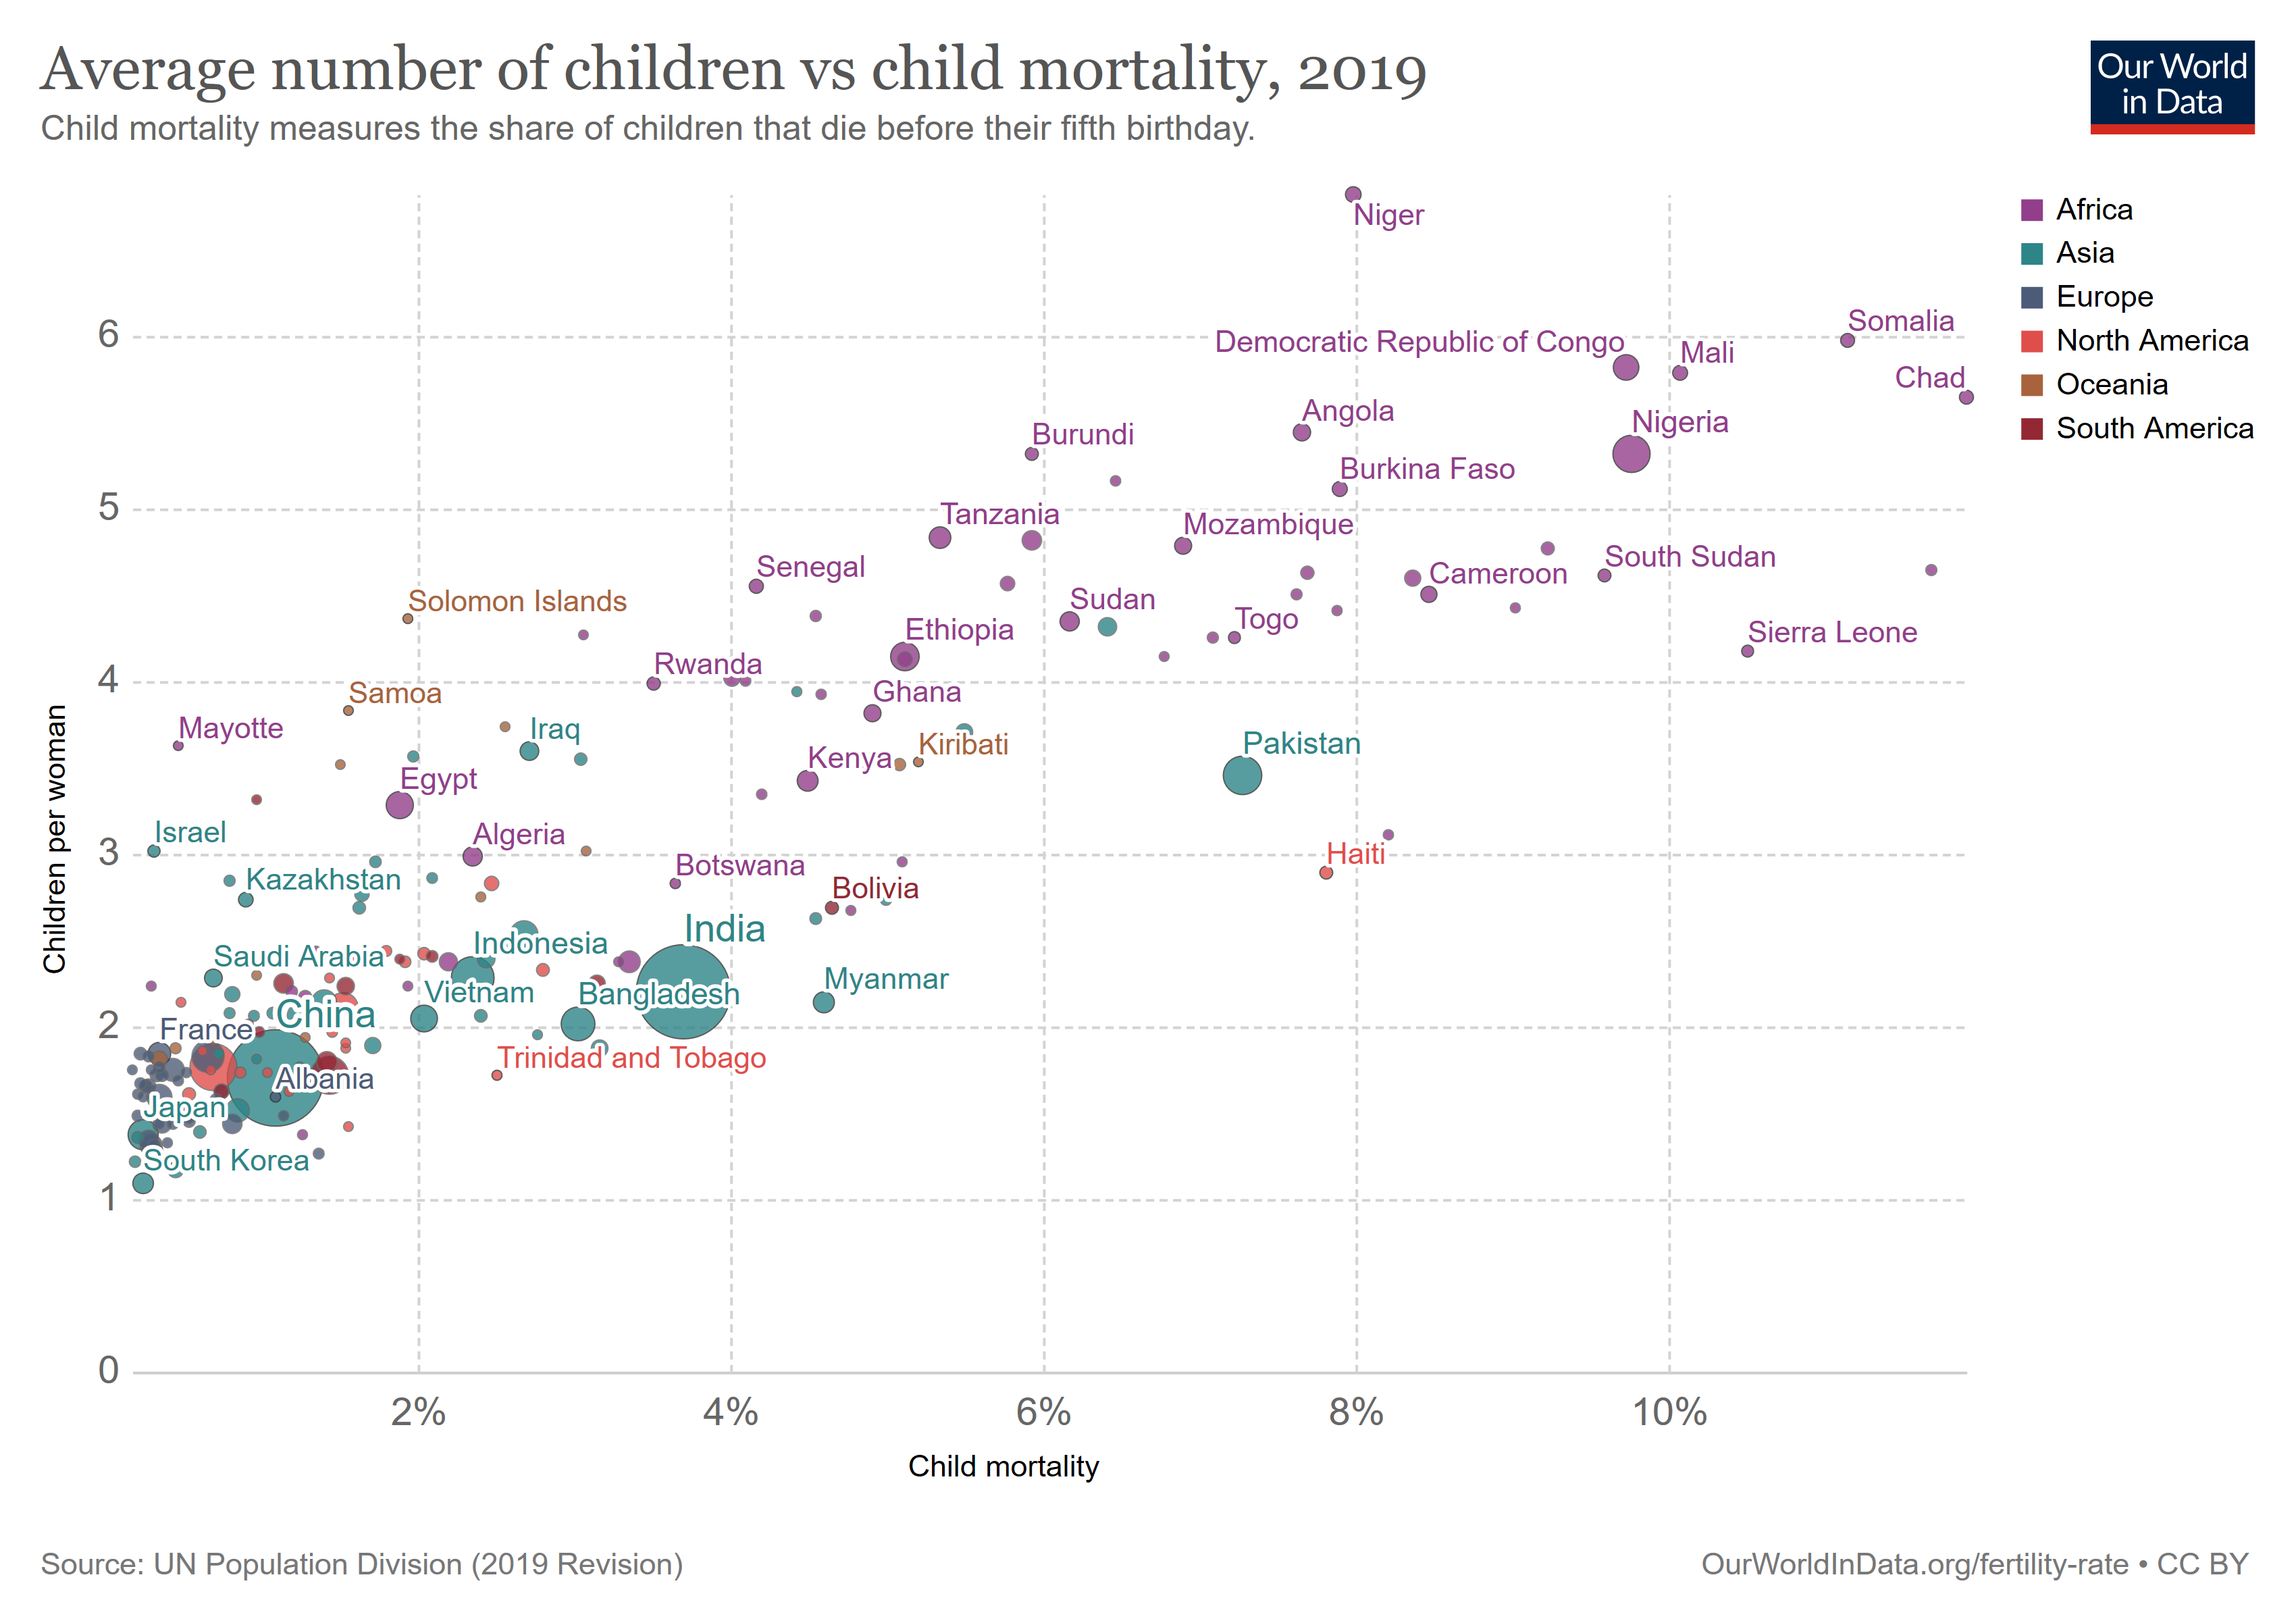 Correlation between child mortality and fertility